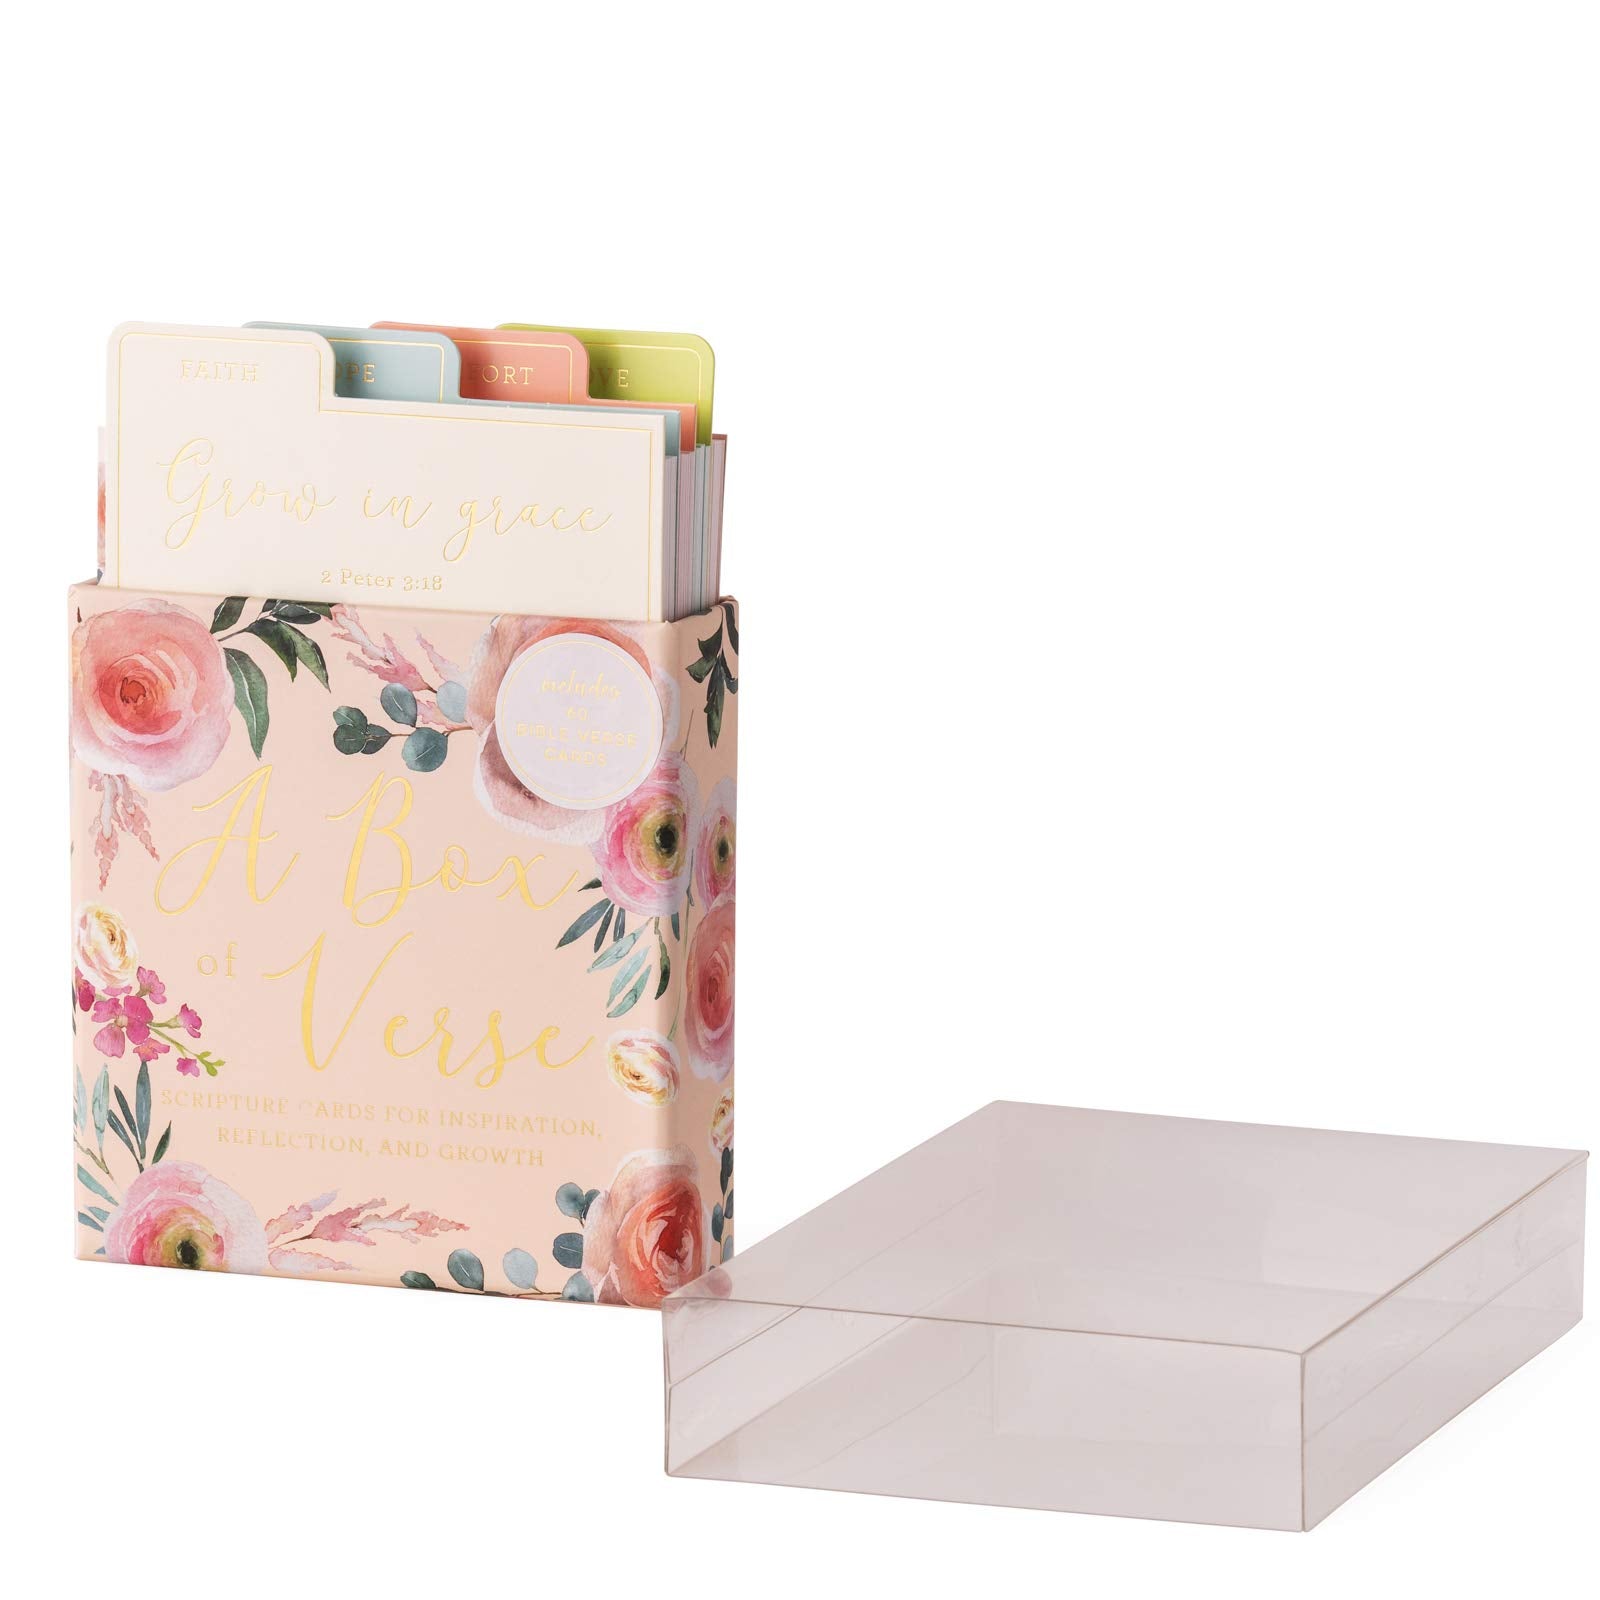 60 Scripture Cards with 4 Tabbed Dividers